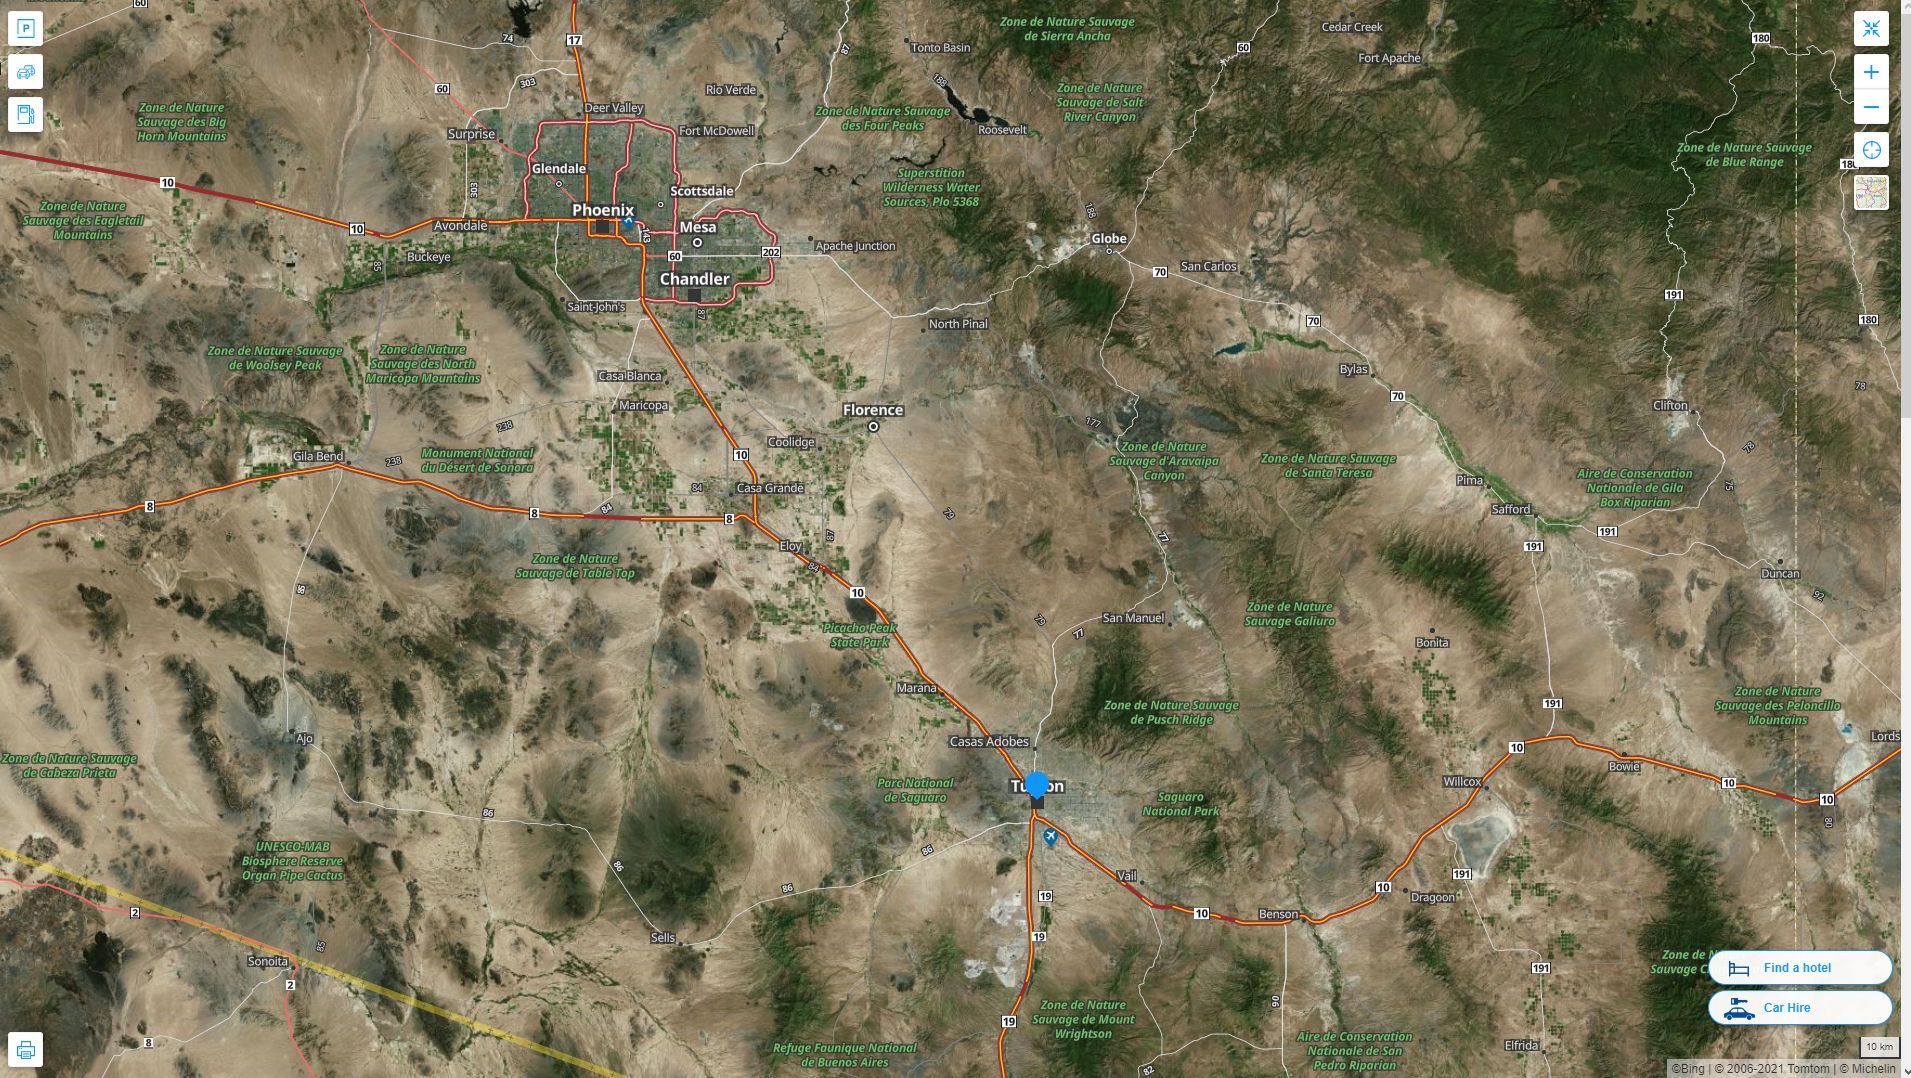 Tucson Arizona Highway and Road Map with Satellite View